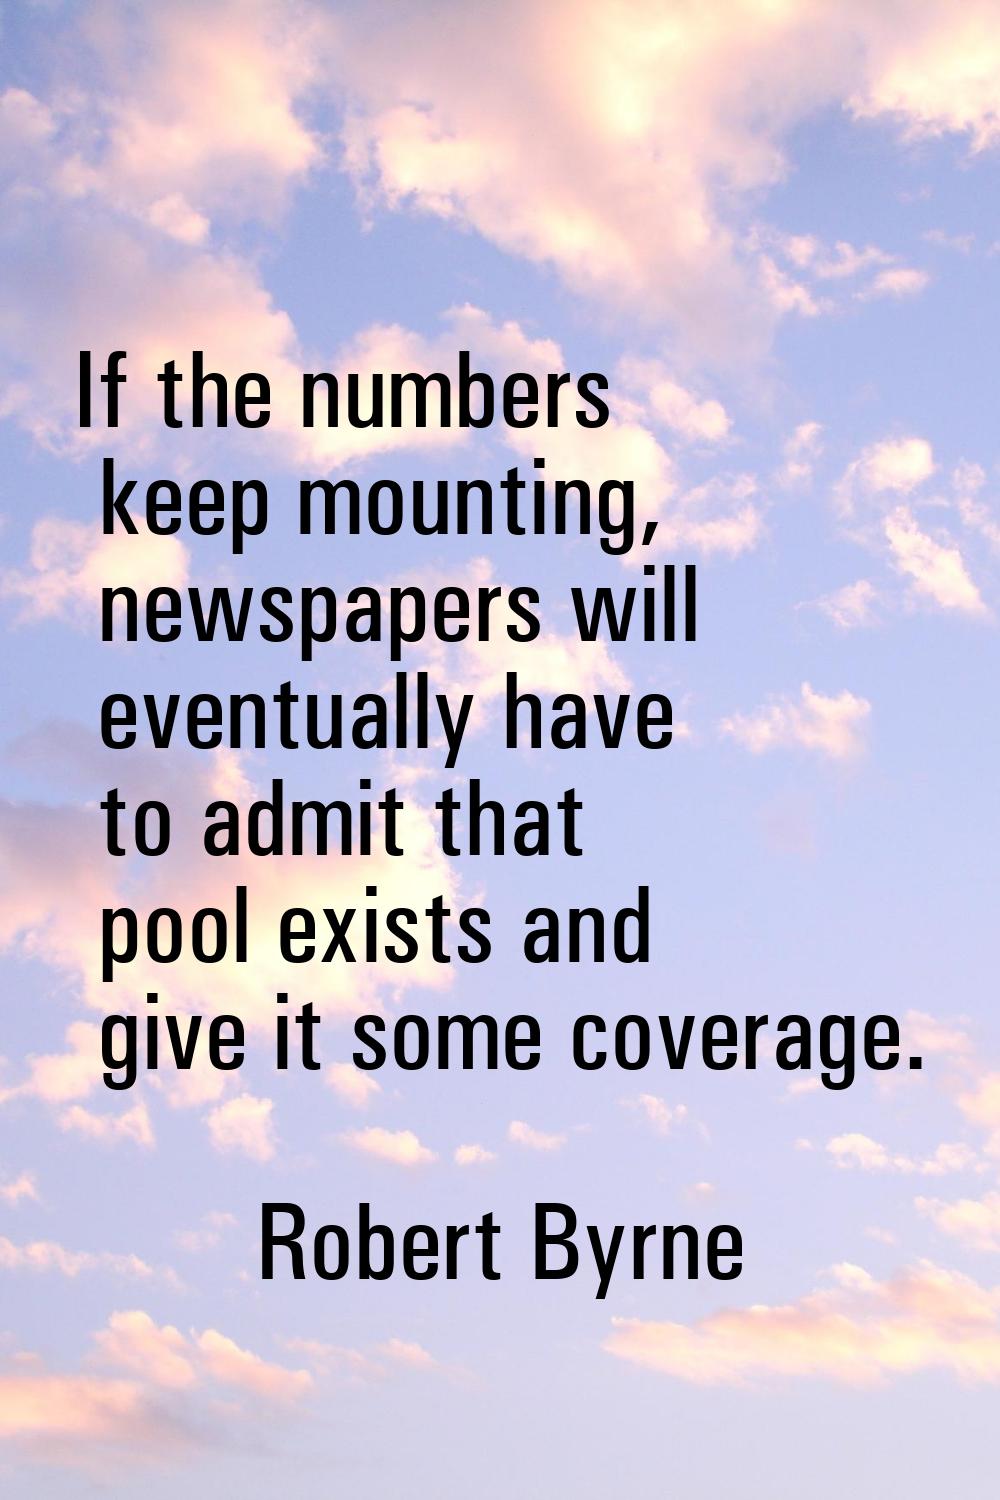 If the numbers keep mounting, newspapers will eventually have to admit that pool exists and give it